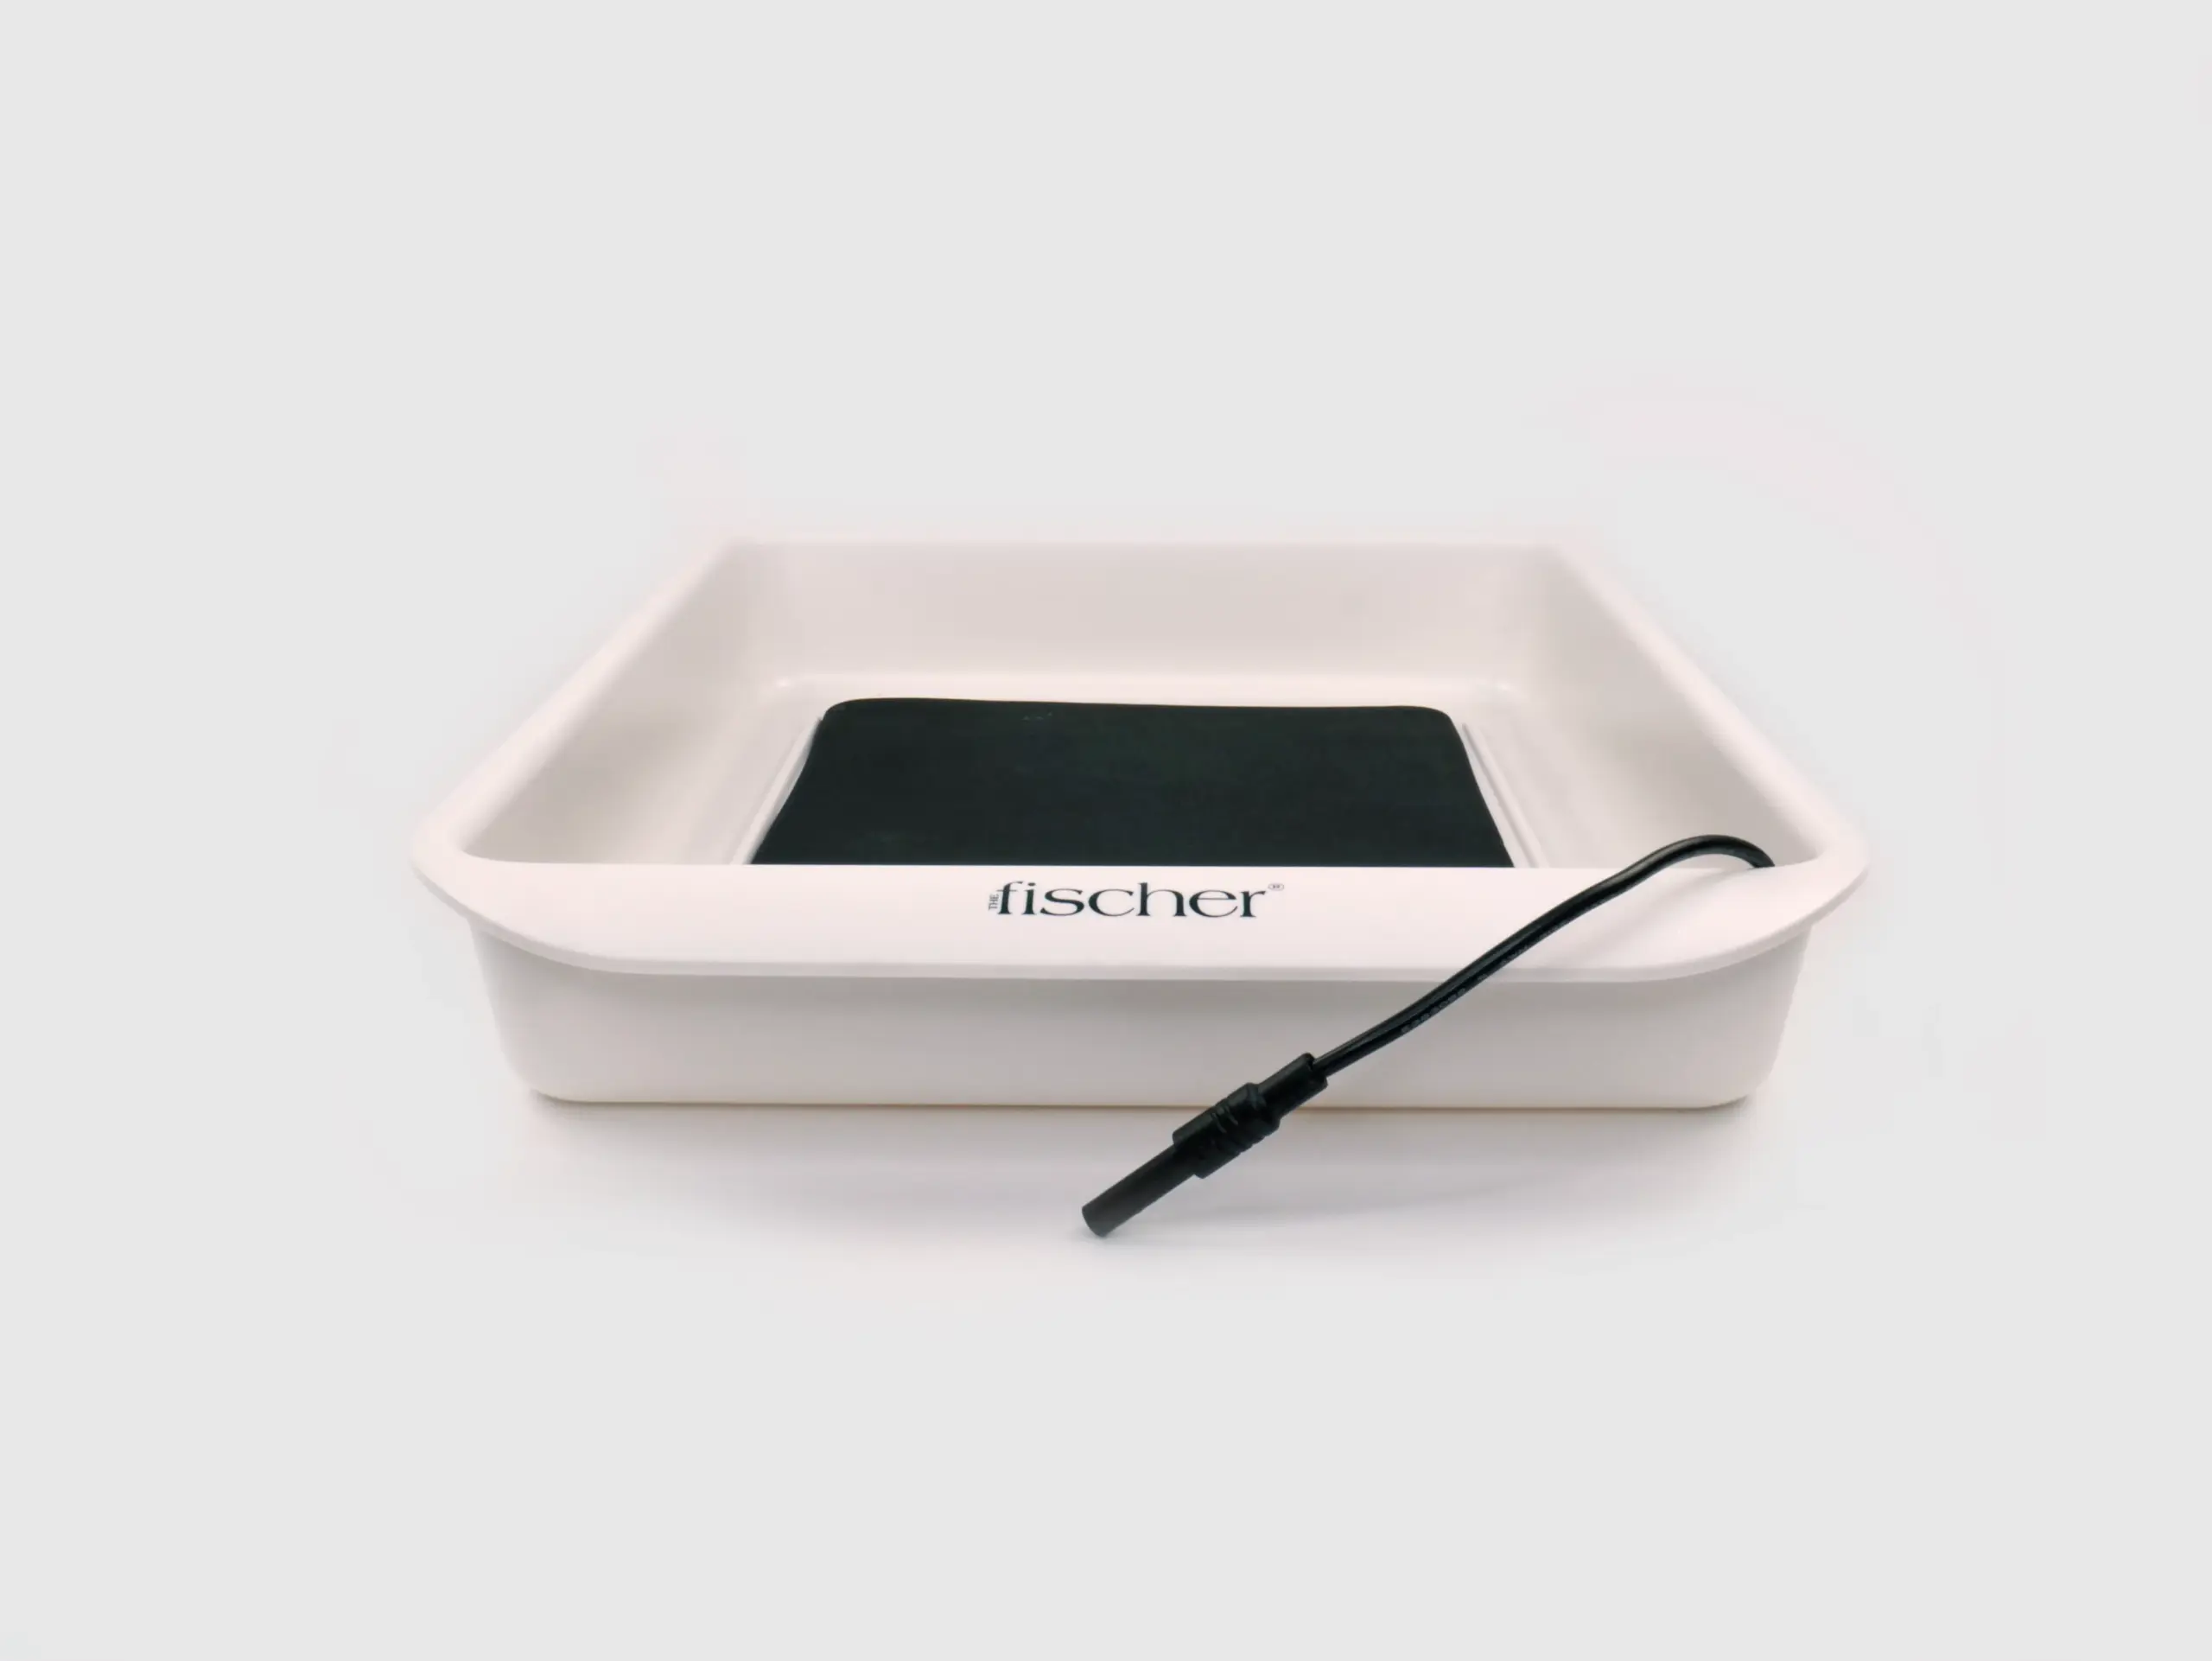 Photograph that precisely spotlights one of the white water bath trays and the black, metal-free silicone electrode contained within RA Fischer's 'The Fischer' Device—an iontophoresis device meticulously designed for the treatment of hyperhidrosis (excessive sweating). The electrode is positioned inside the tray, and the entire composition is set against a clean white background. [ Iontophoresis Device for Sweating ]